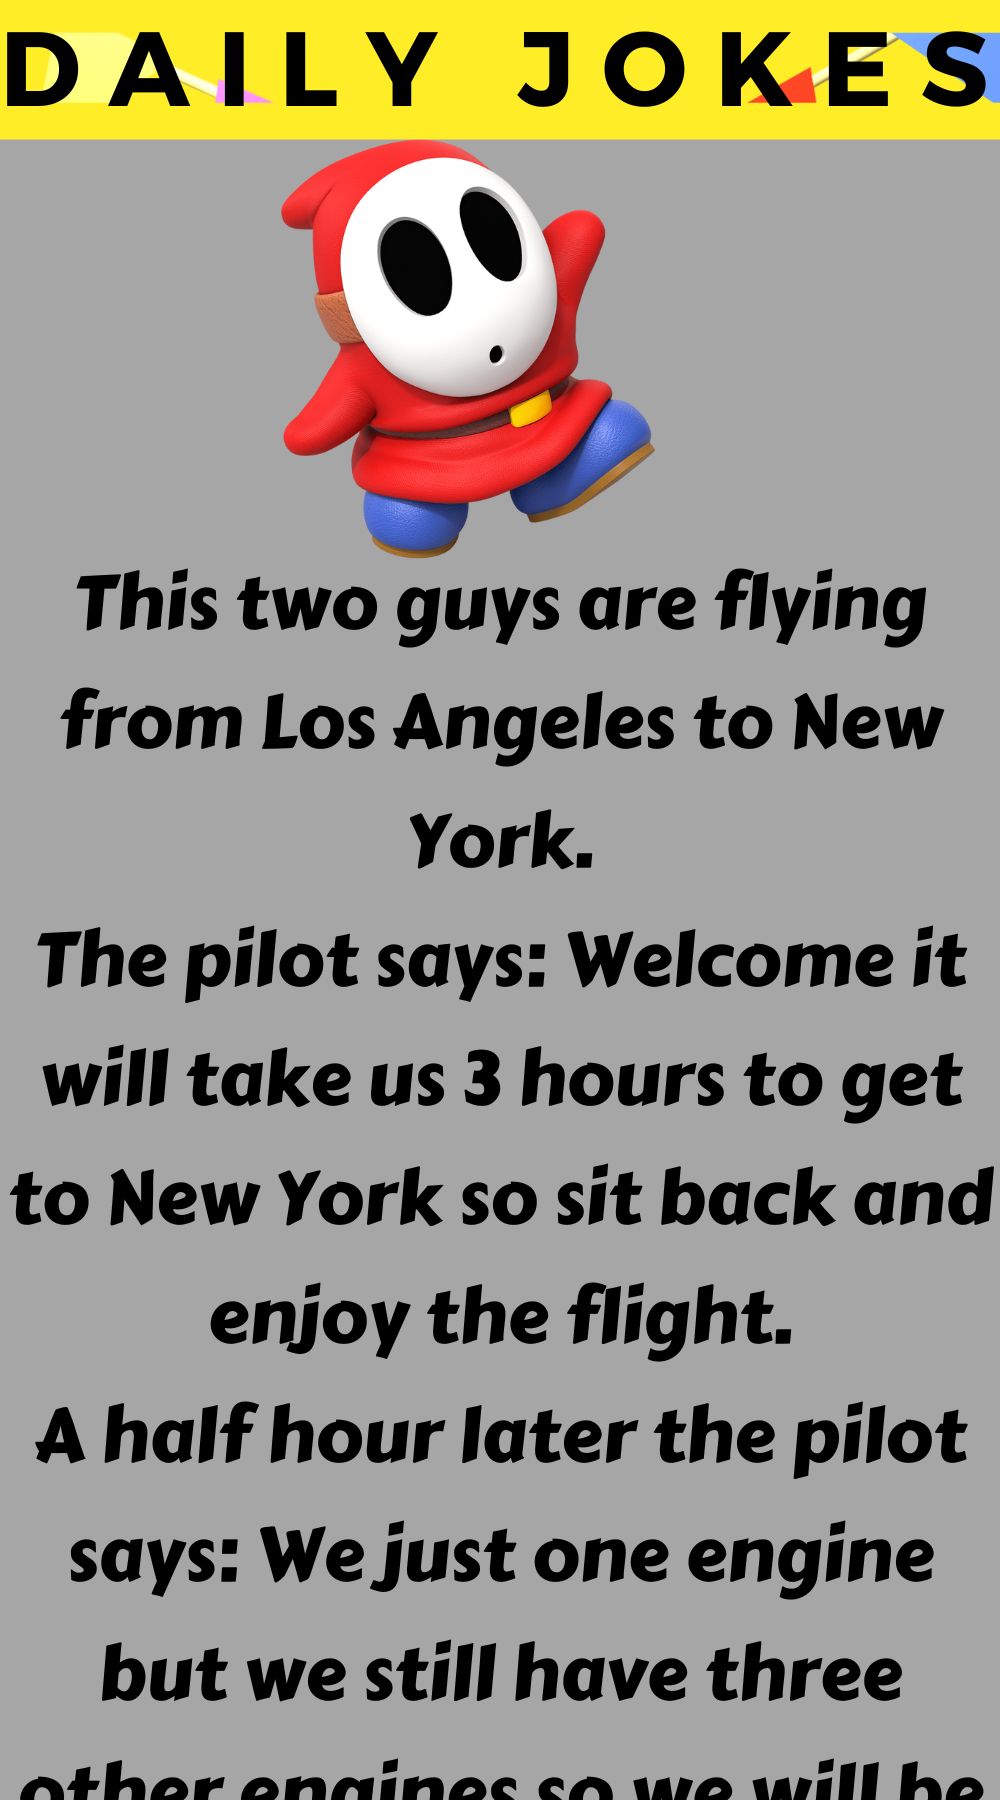 This two guys are flying from Los Angeles to New York